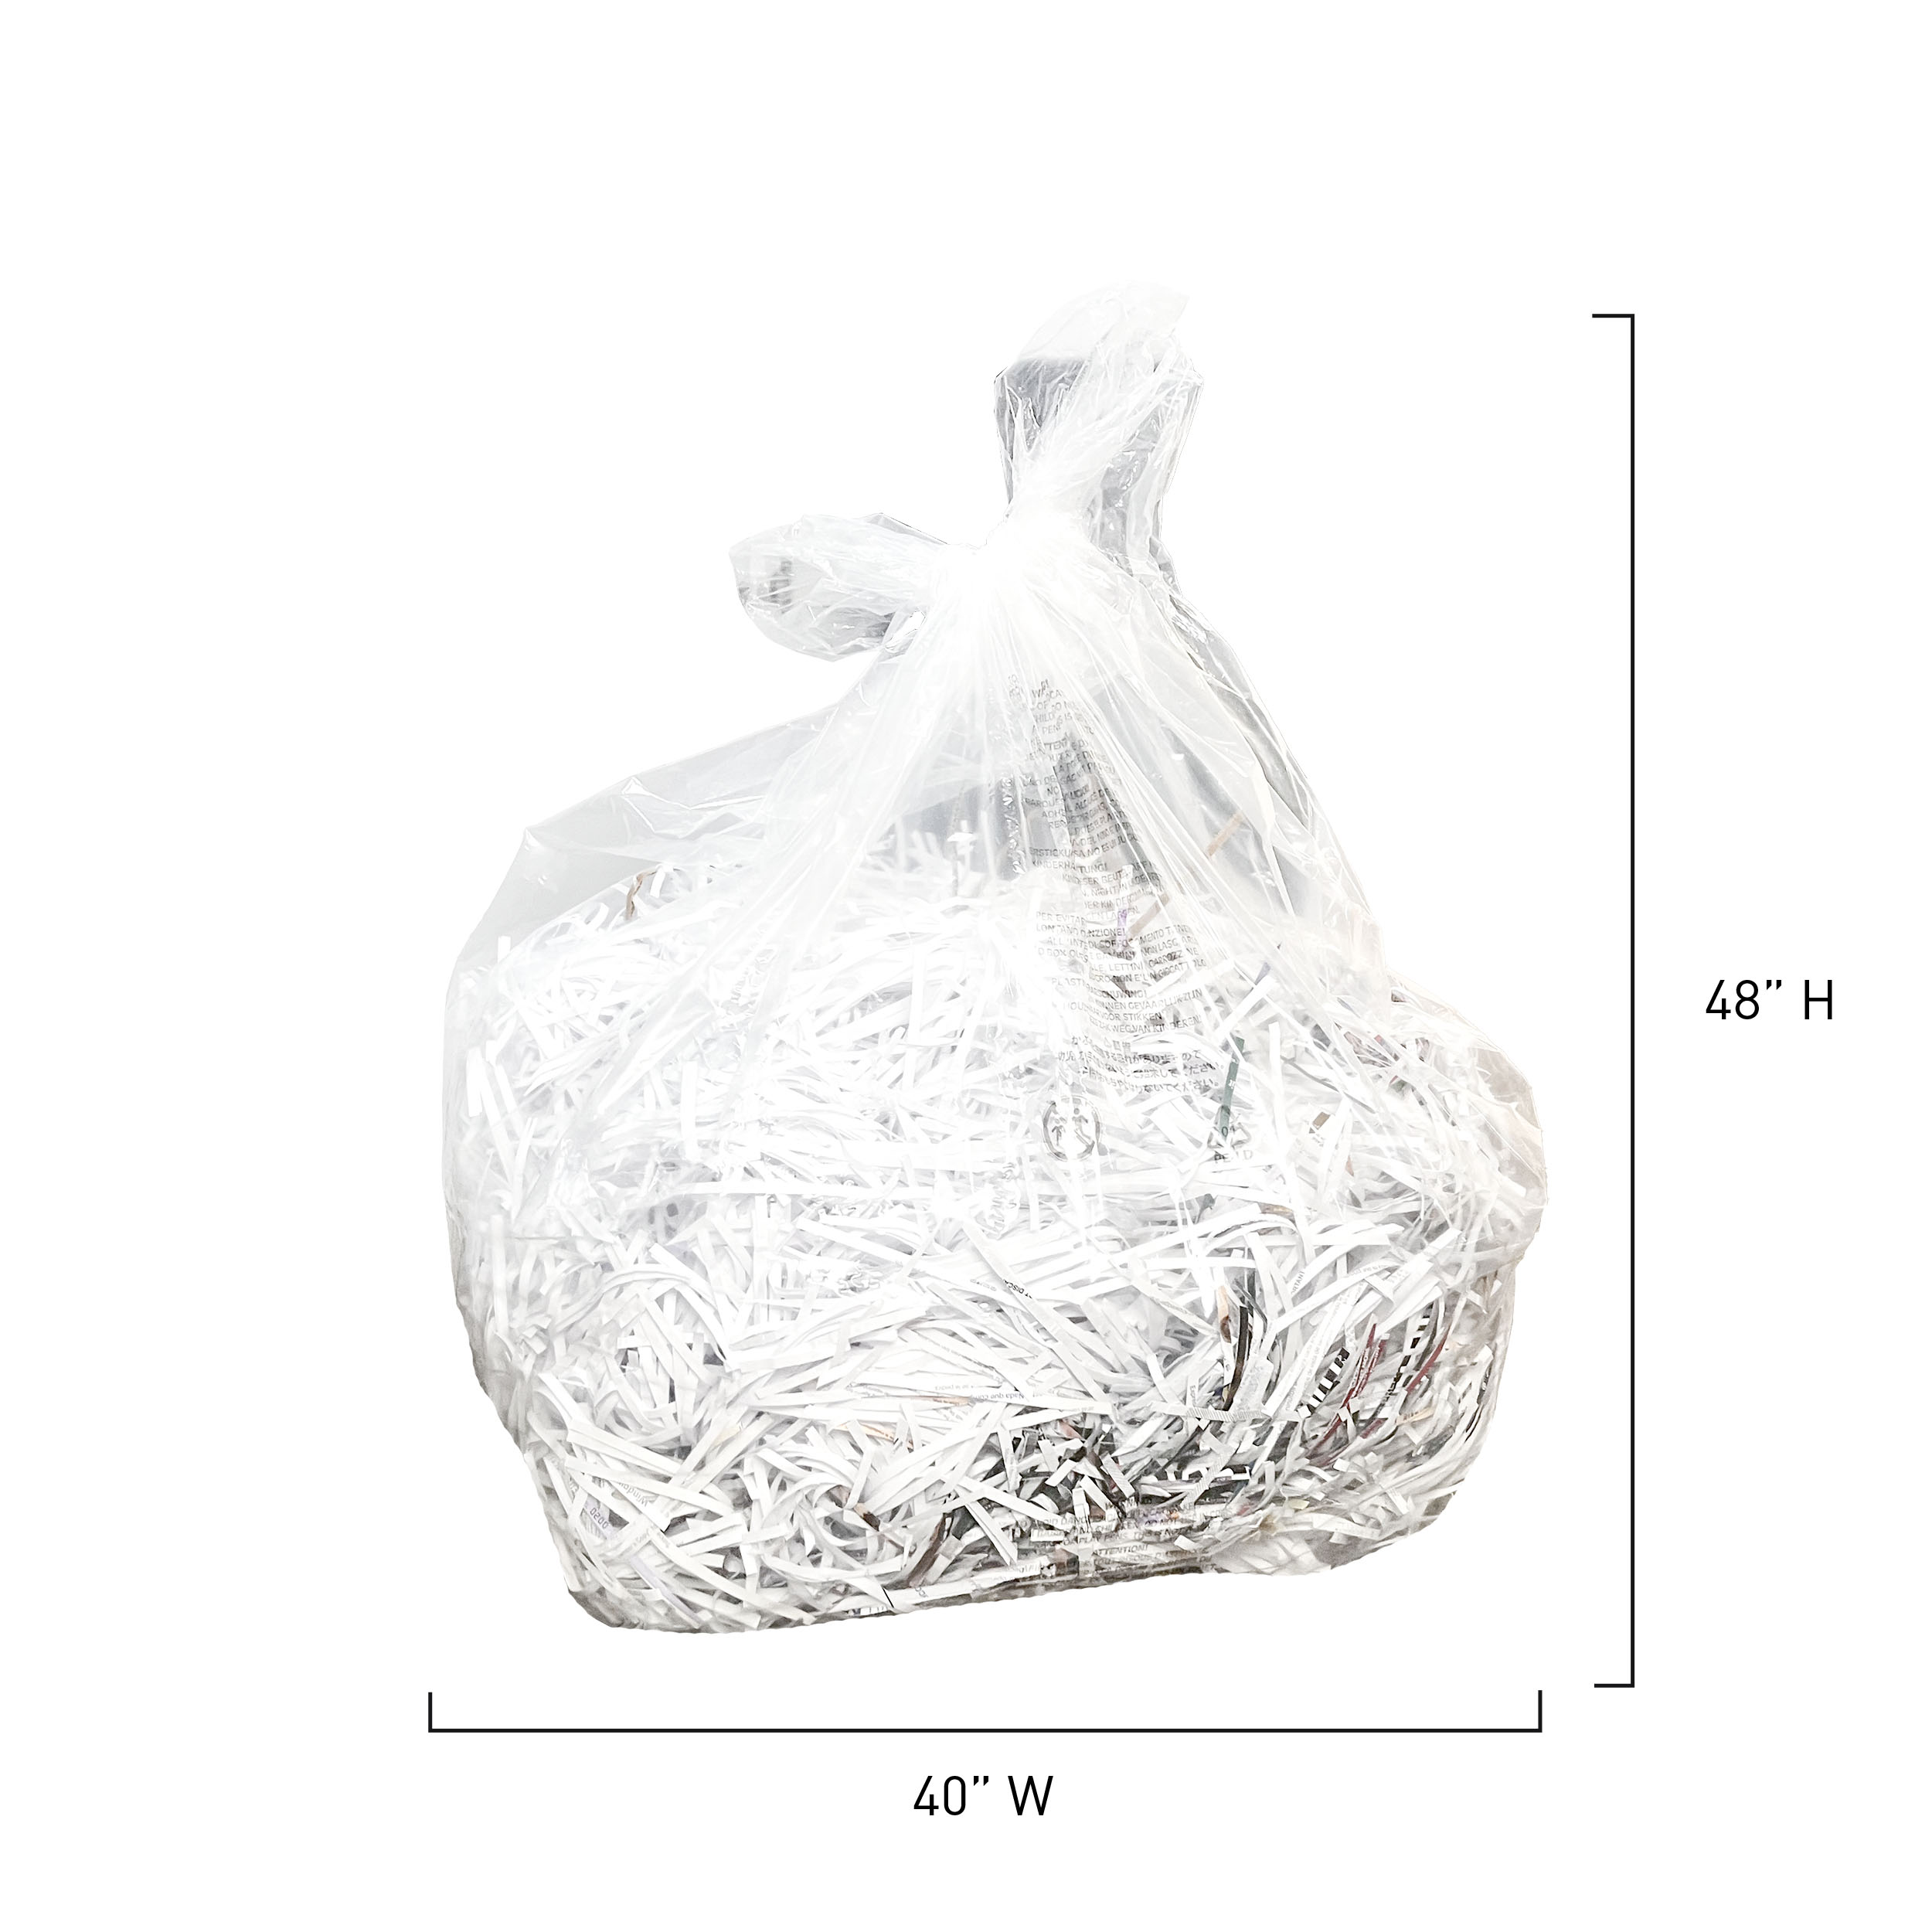 ideal Shredder Bags, 40” x 48”, 56 Gallon Bag, Gusseted, Compatible with ideal Shredder Models 3105, 3804, 4002, 4005, 4605, 4606 - image 4 of 5